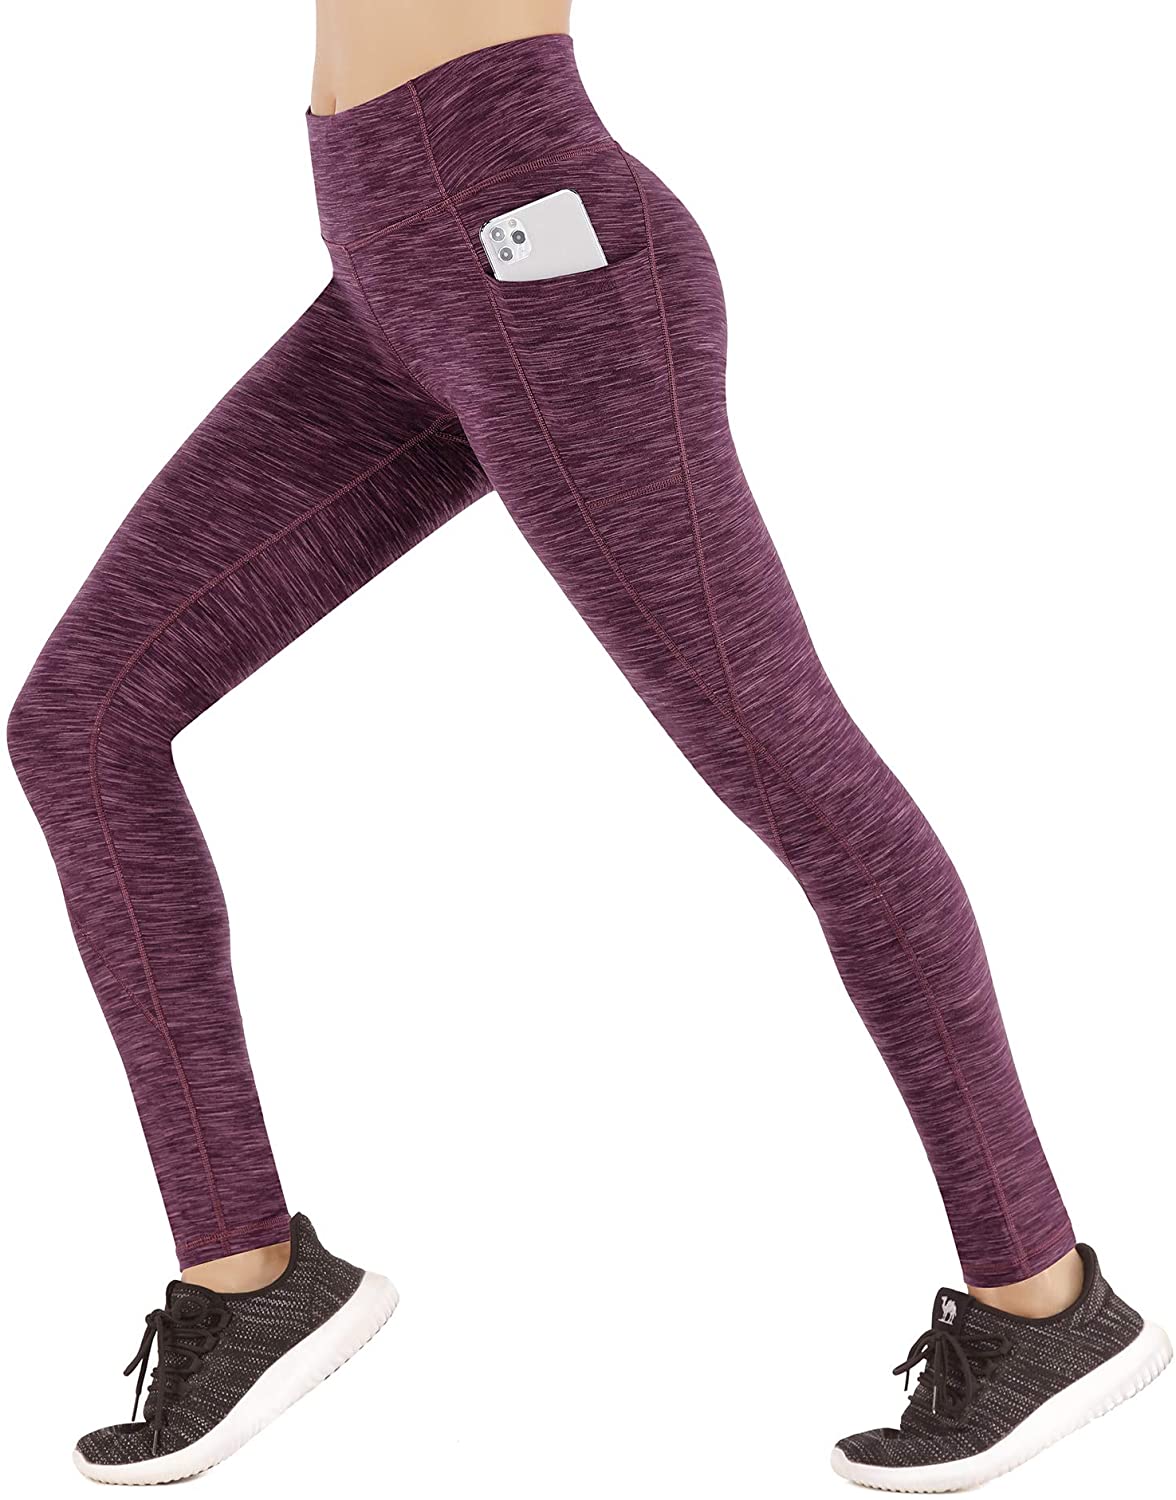 Heathyoga Yoga Pants for Women Leggings with Pockets for